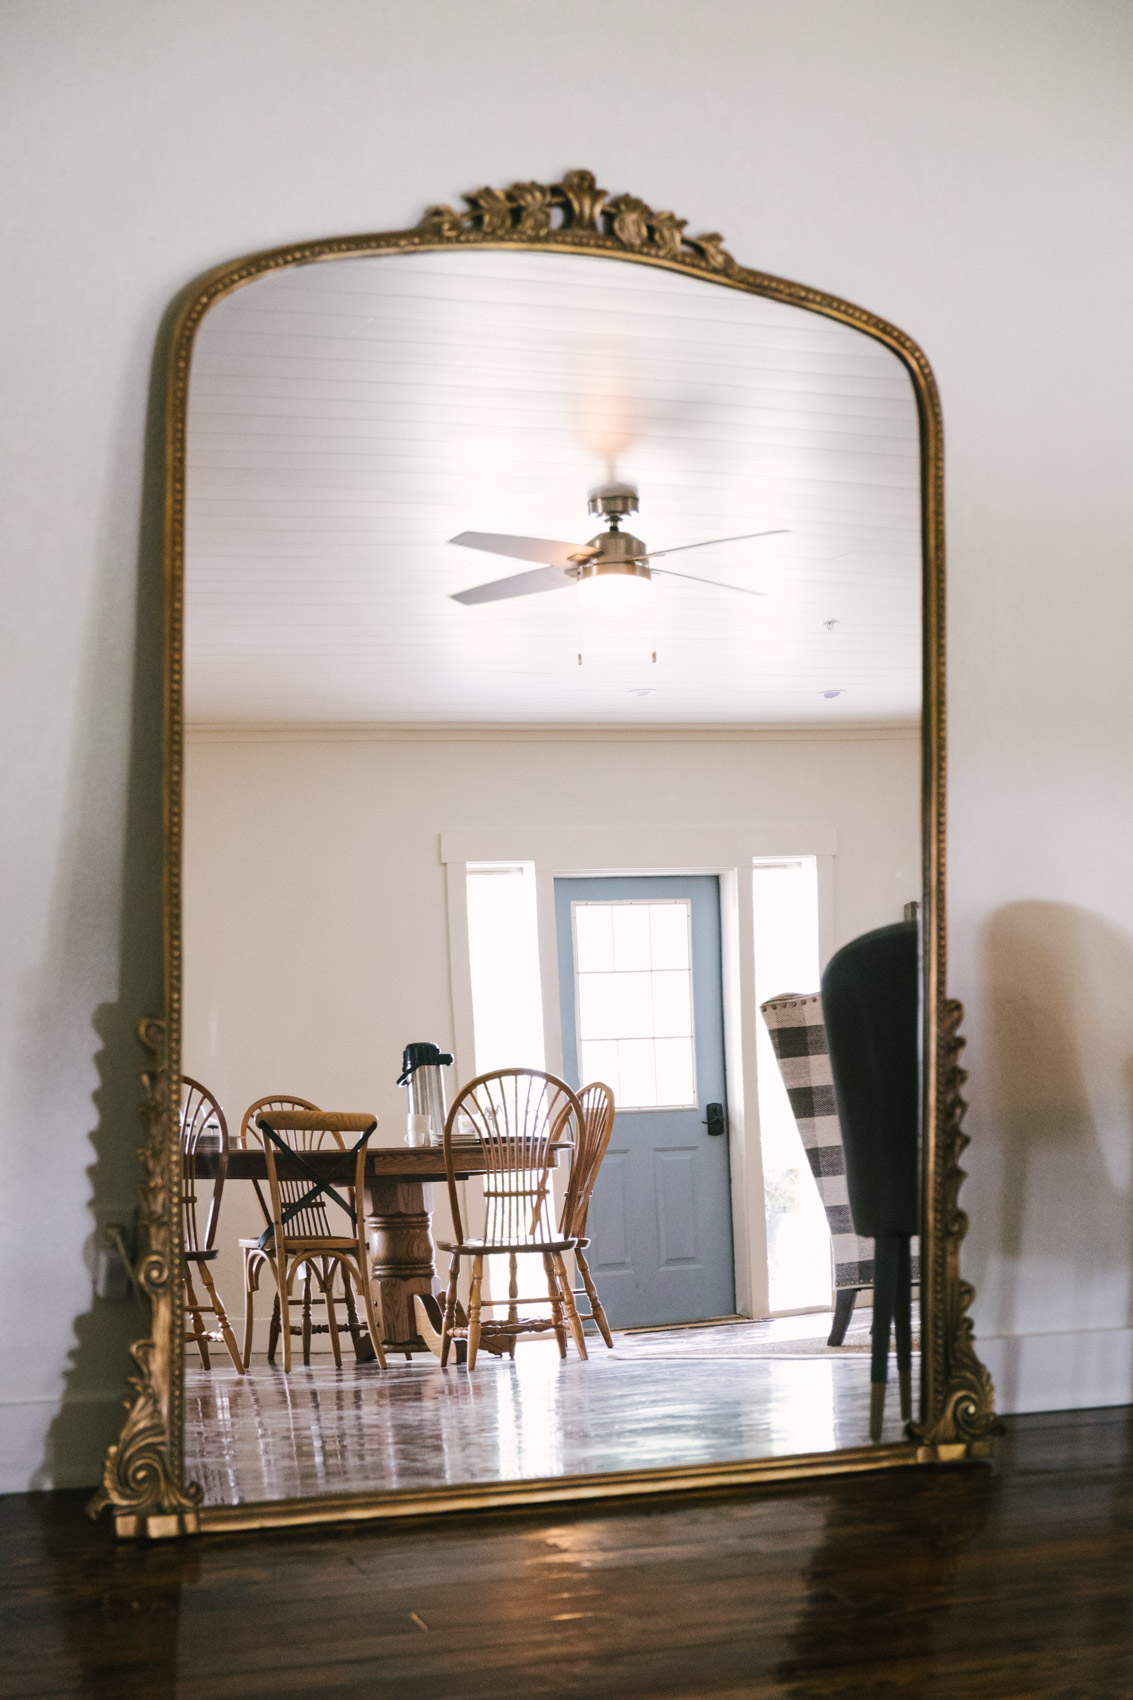 A stunning vintage inspired mirror at the Red Barn Inn in Deep Creek Lake, Maryland | Mirror decor ideas | full length mirror decorating ideas